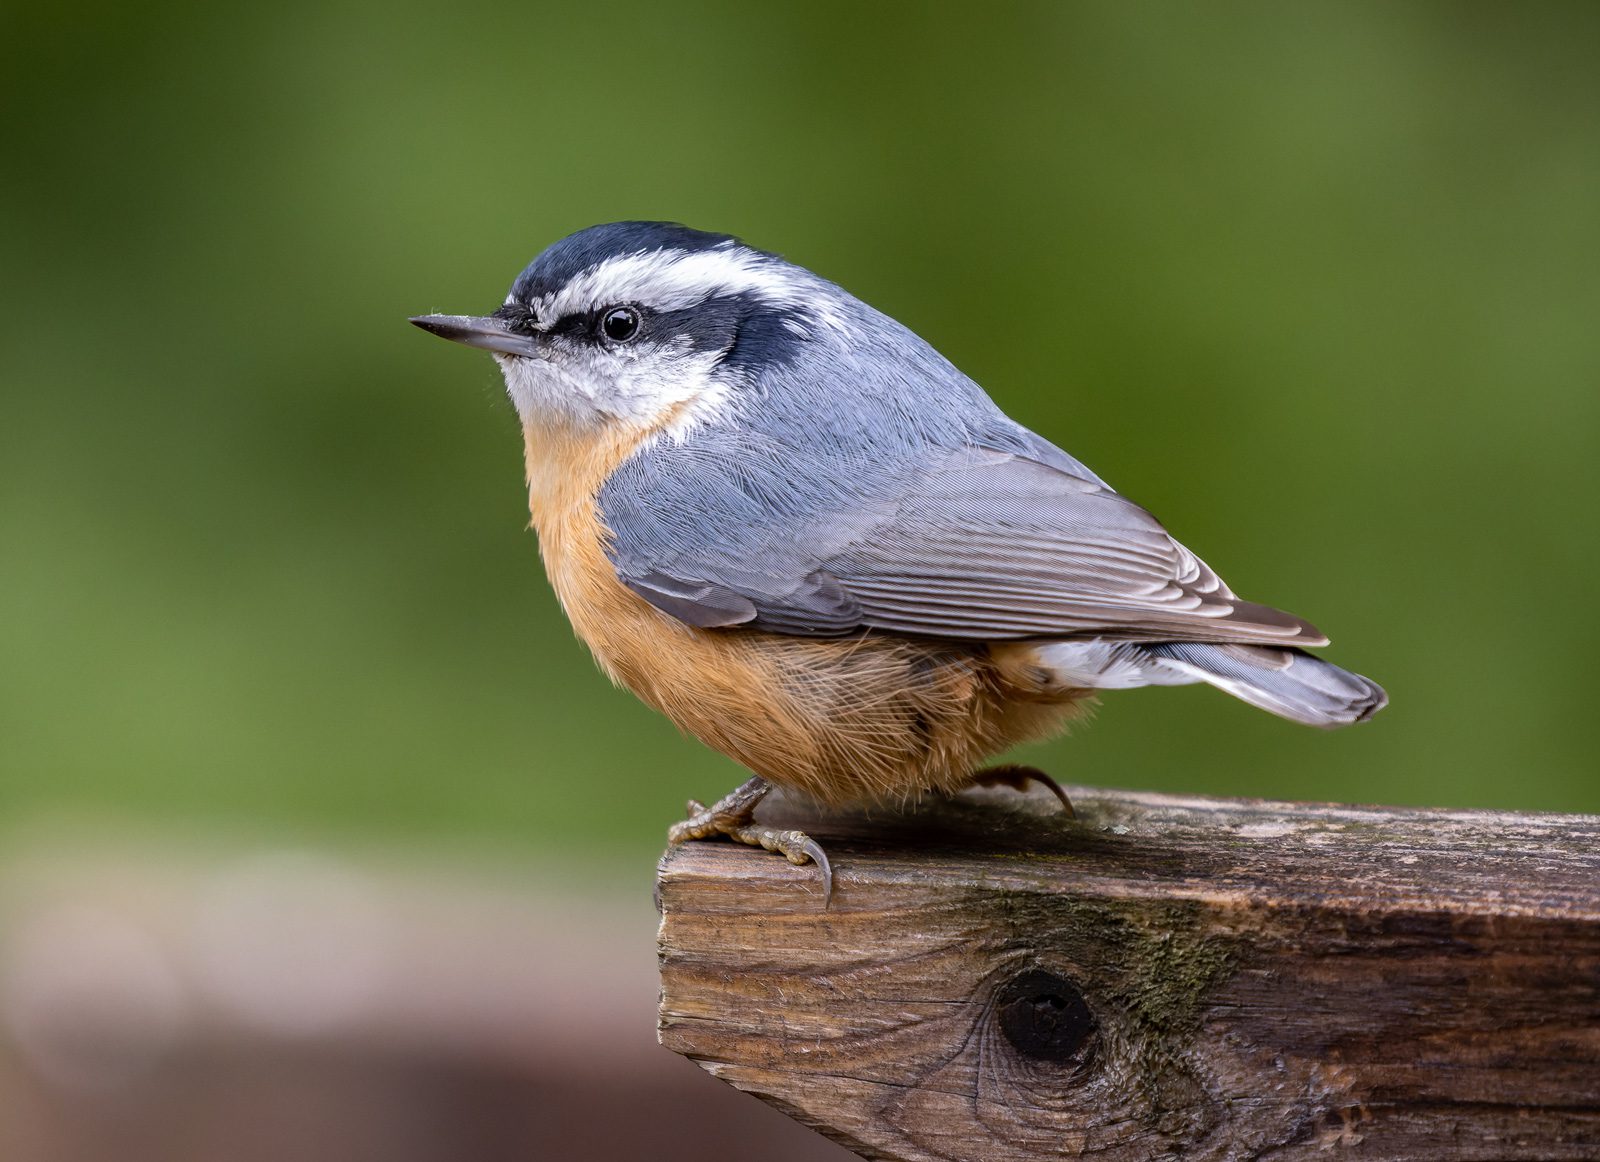 Red-breasted Nuthatches are a well known "irruptive" species,, whose populations in the U.S. correspond to food availability on northern breeding grounds. Photo by Frédérick Lelièvre/Macaulay Library.